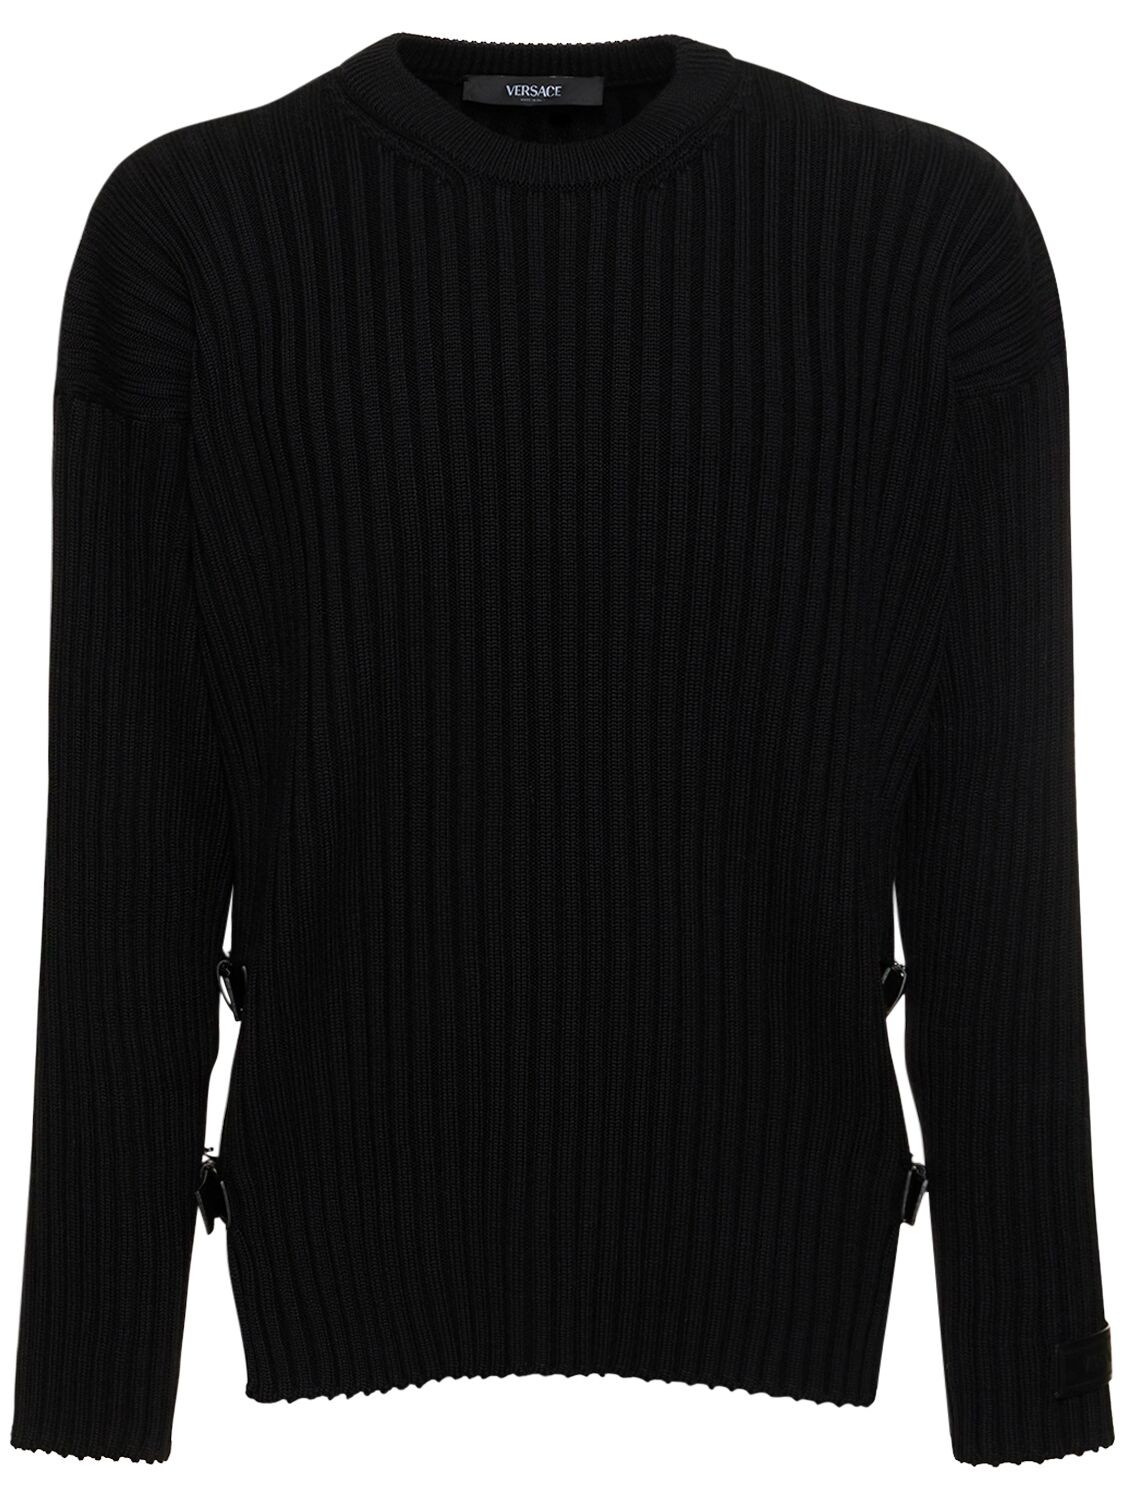 Image of Wool Knit Sweater W/ Buckles